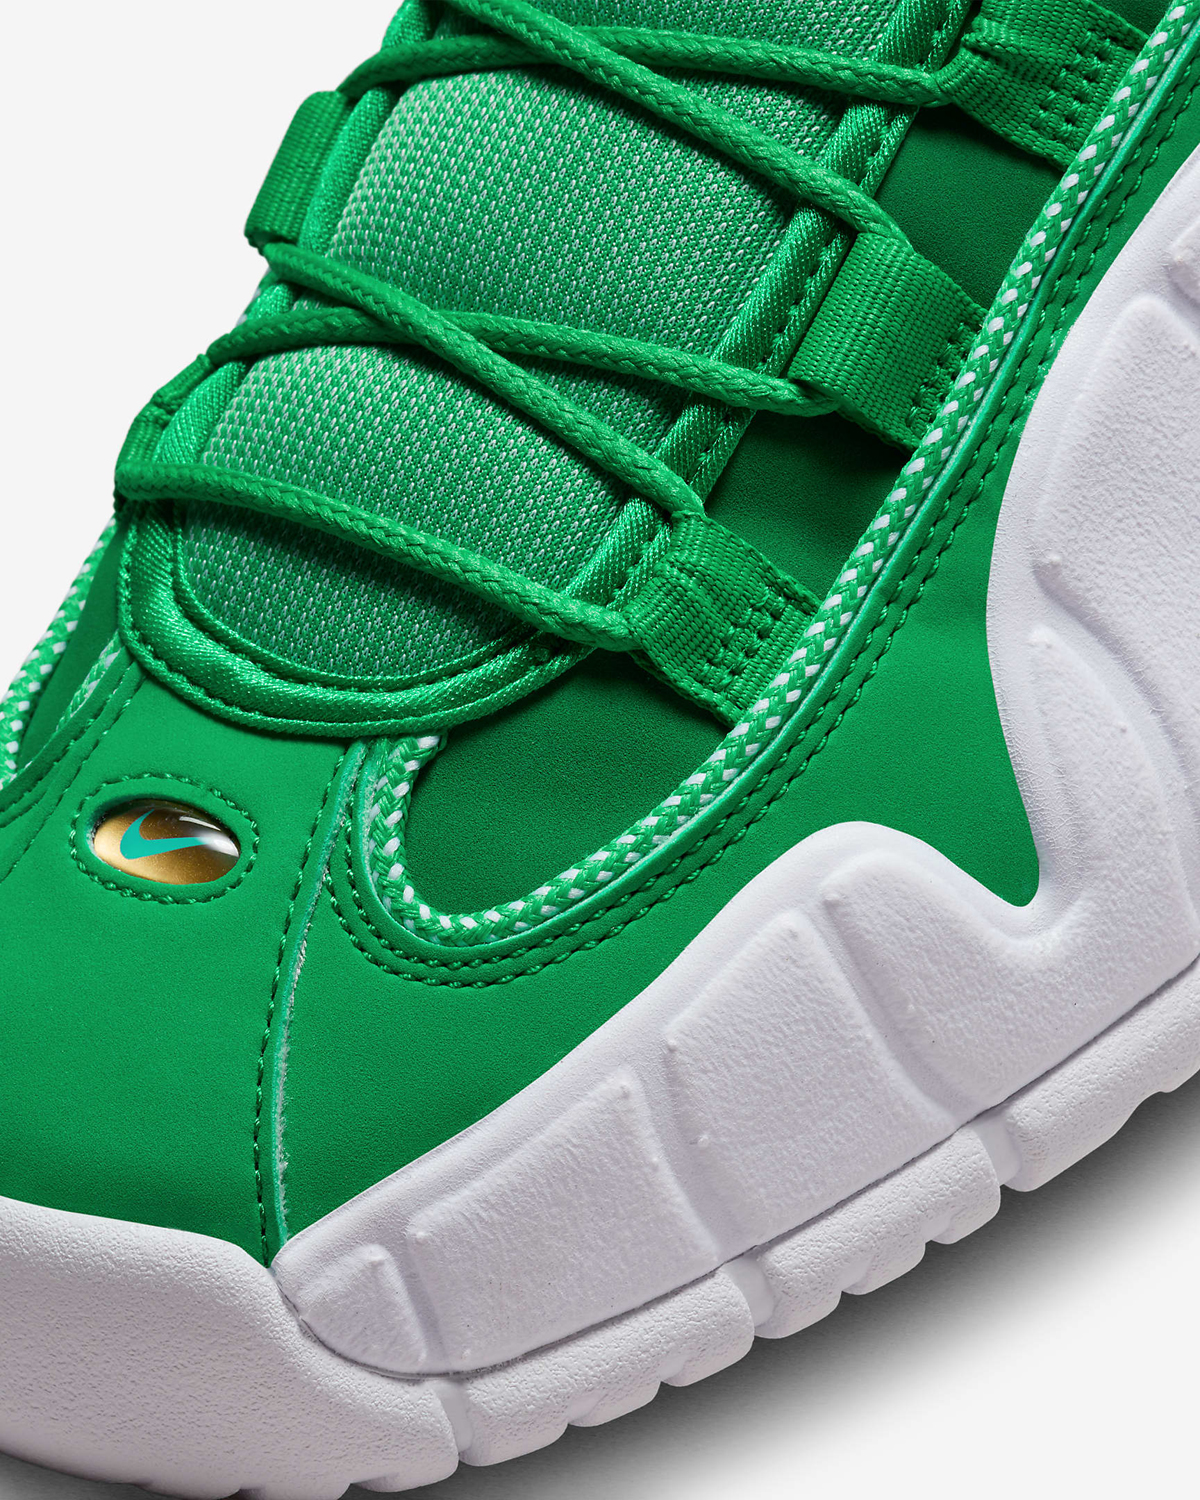 Nike-Air-Max-Penny-Stadium-Green-Release-Date-7